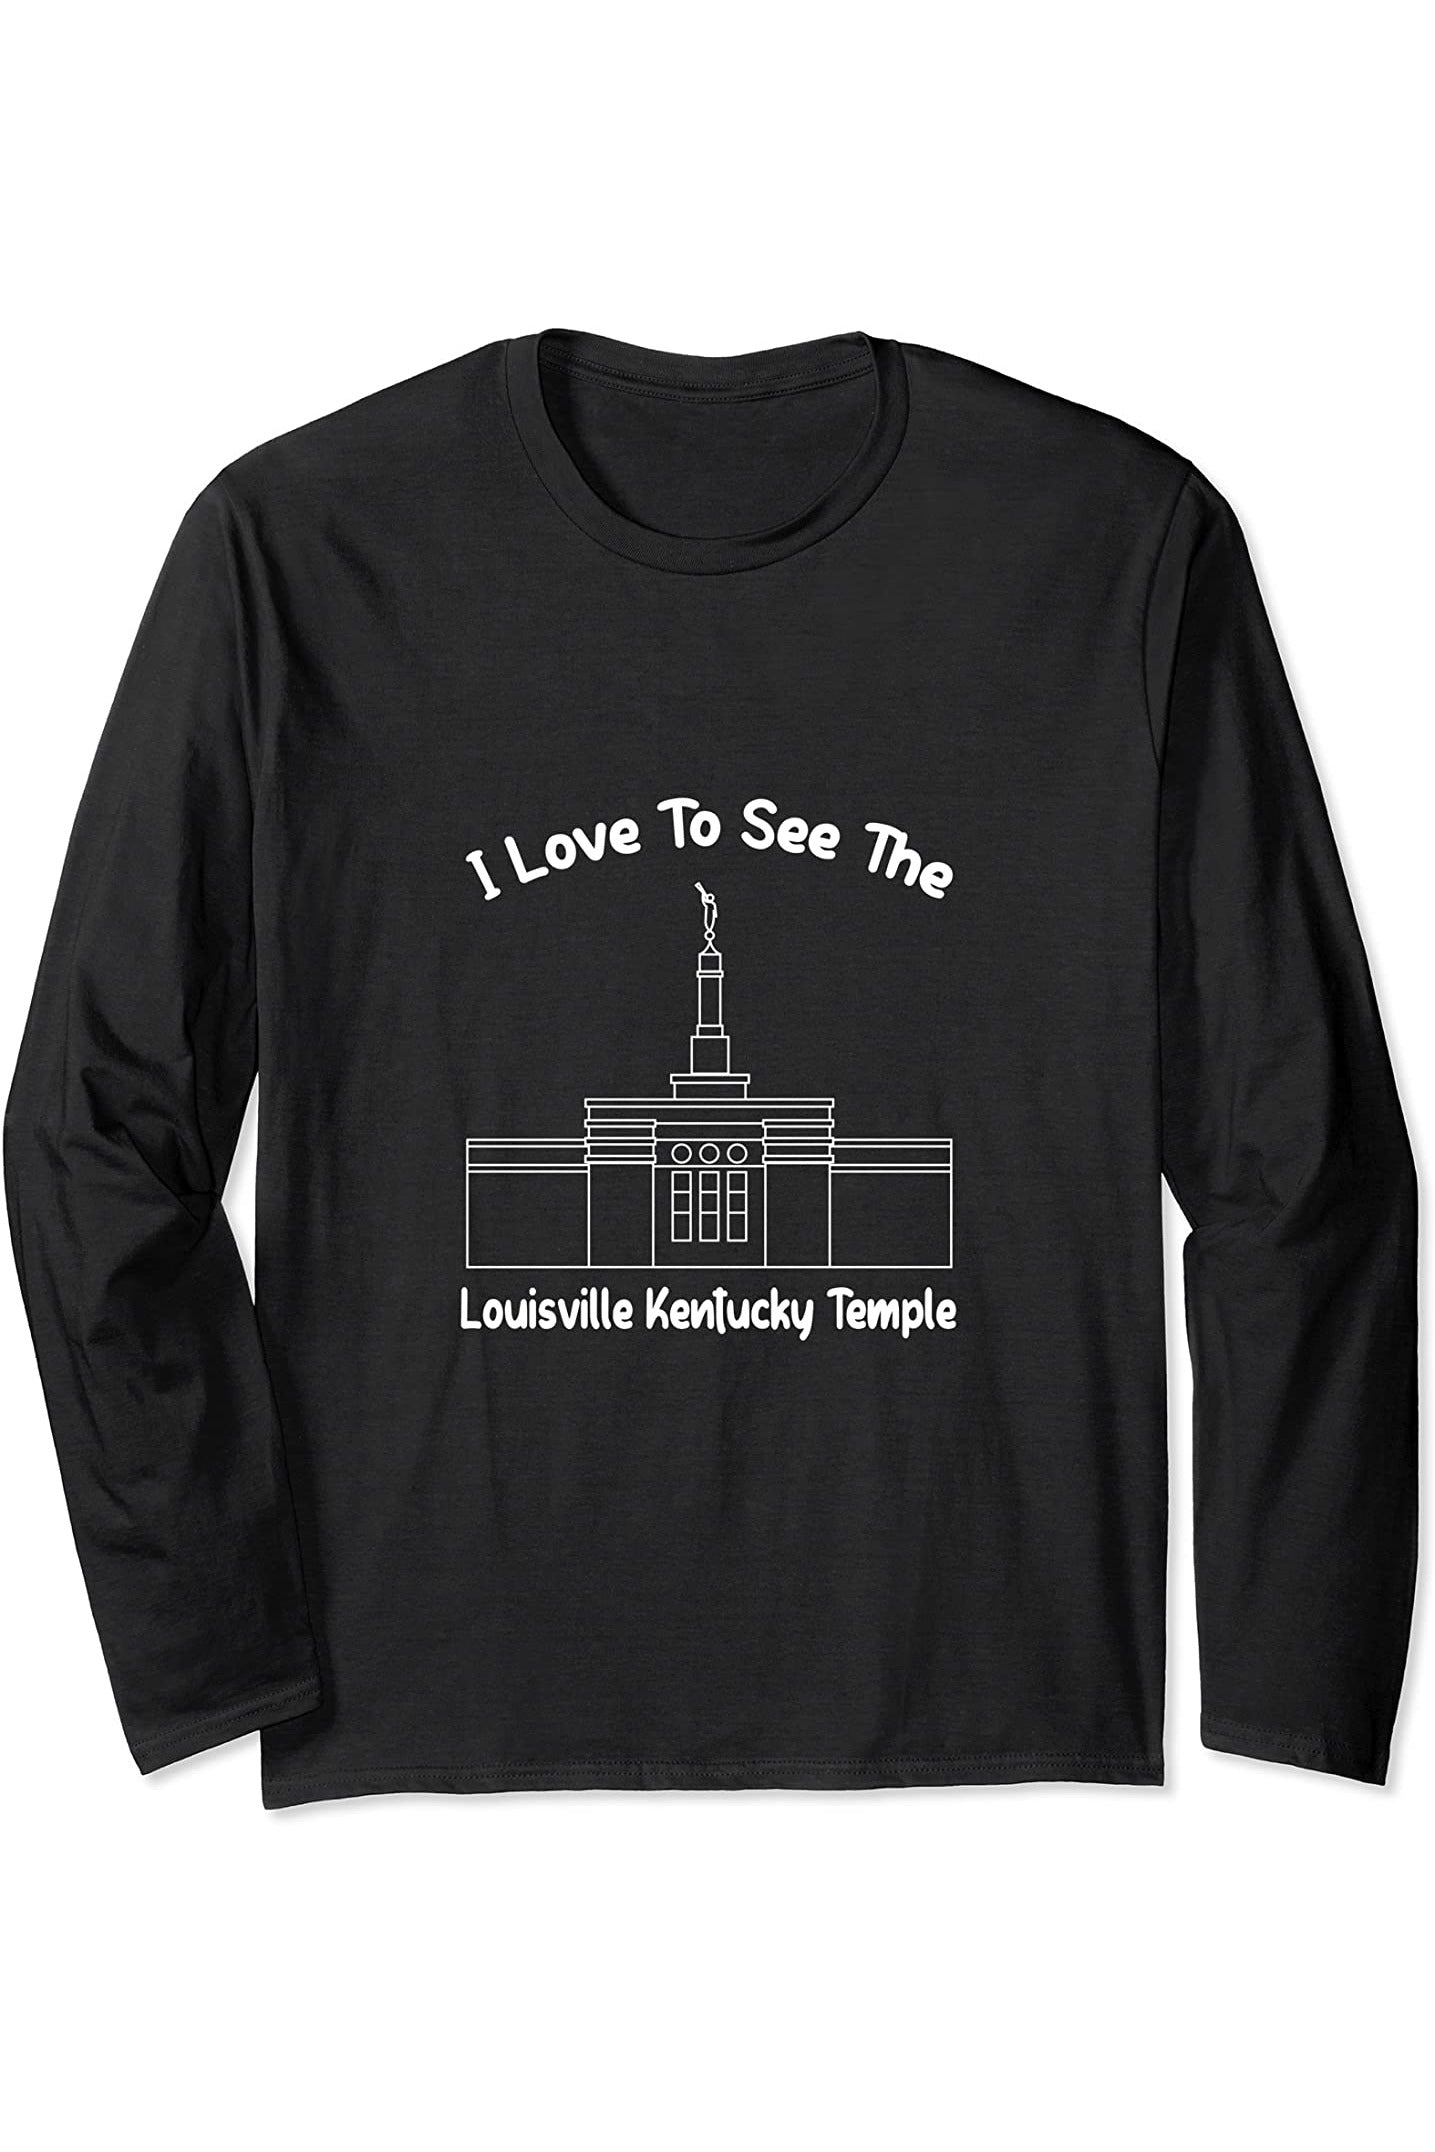 Louisville Kentucky Temple Long Sleeve T-Shirt - Primary Style (English) US